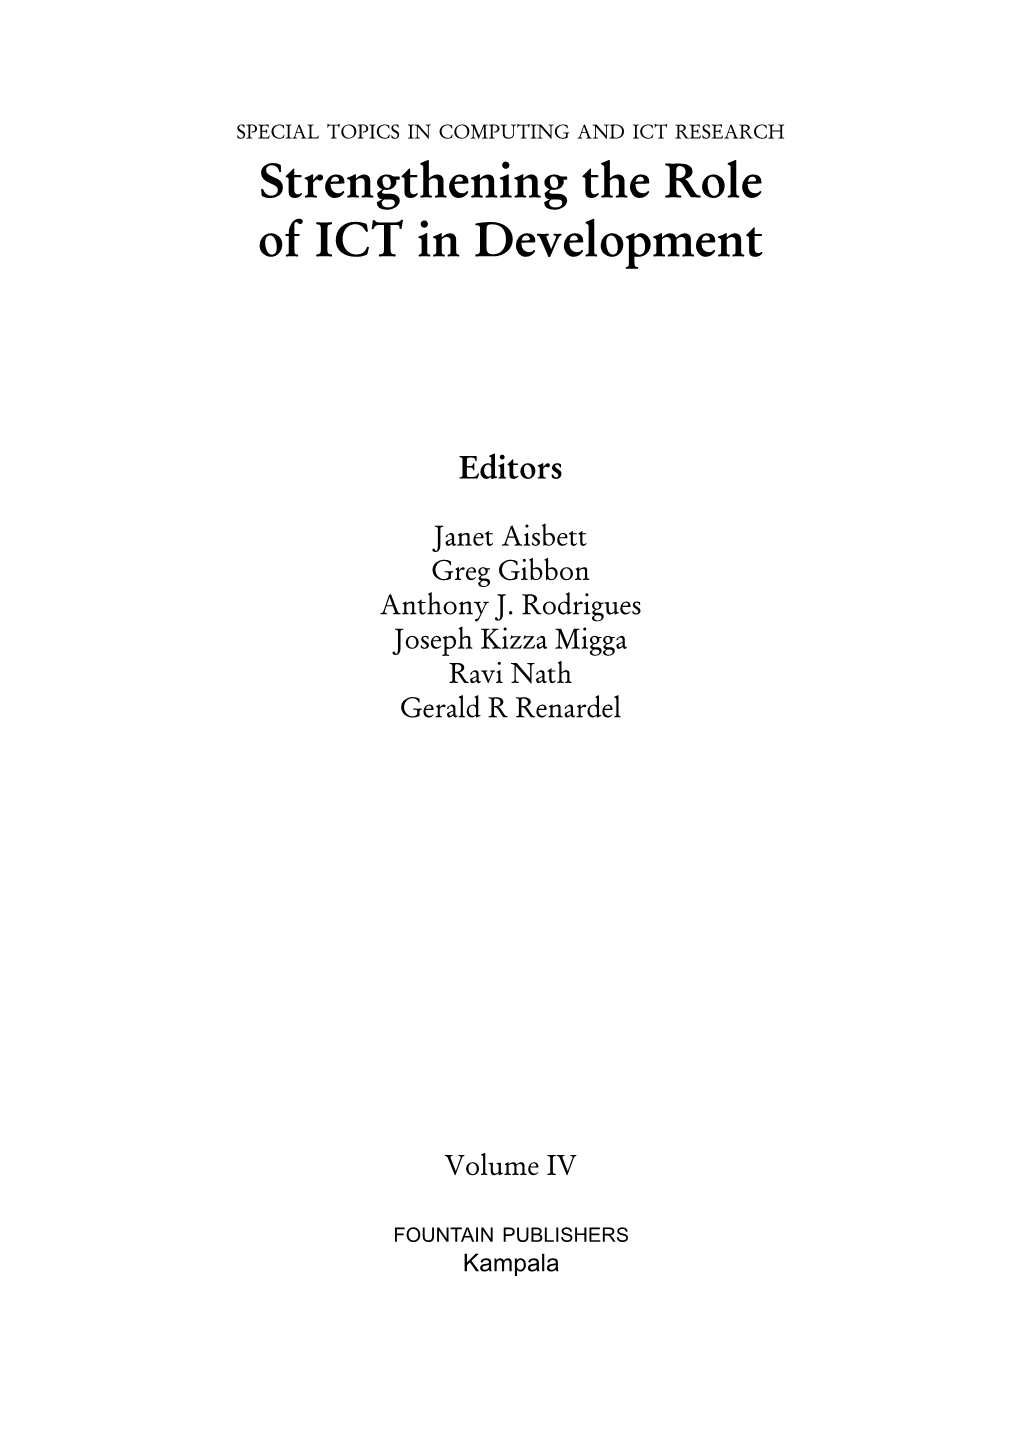 Strengthening the Role of ICT in Development